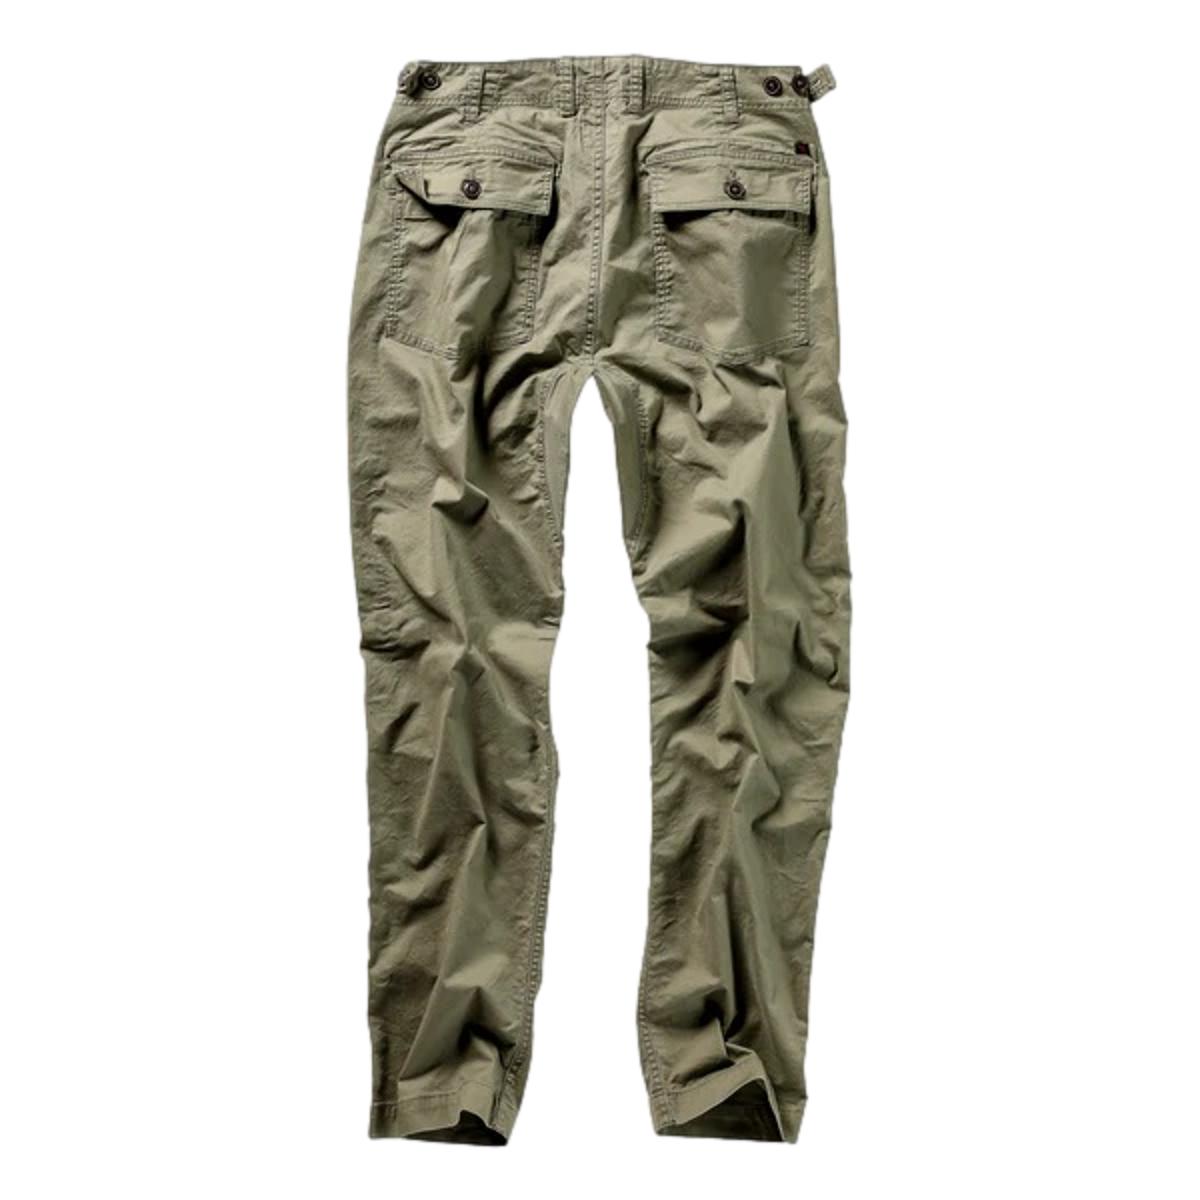 Canvas Supply Pant Olive Drab - Fatigue